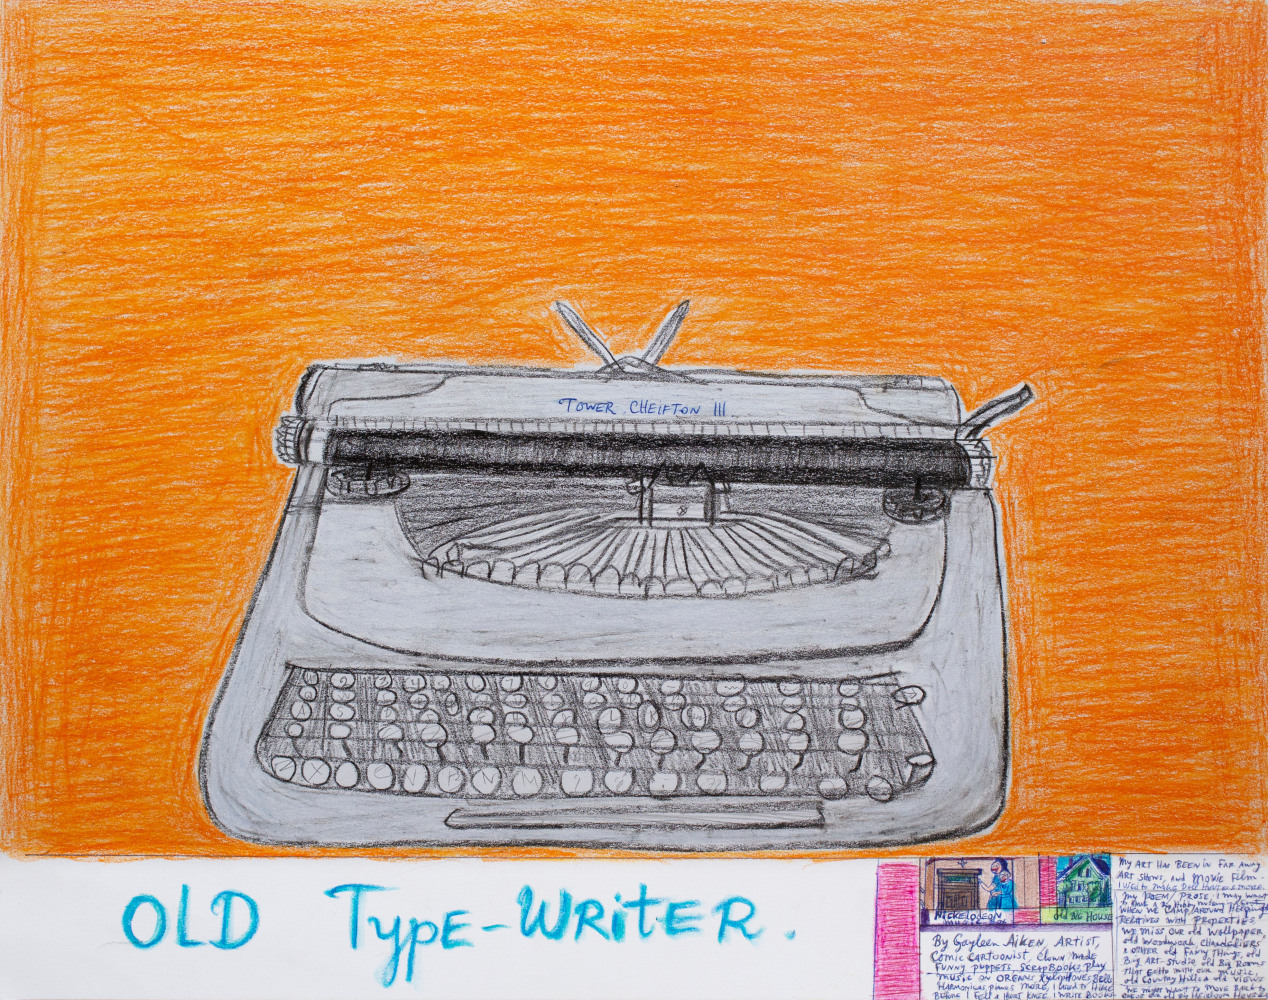 Old Type-Writer, 1999
Colored pencil, ballpoint pen, and crayon on paper
11 x 14 inches